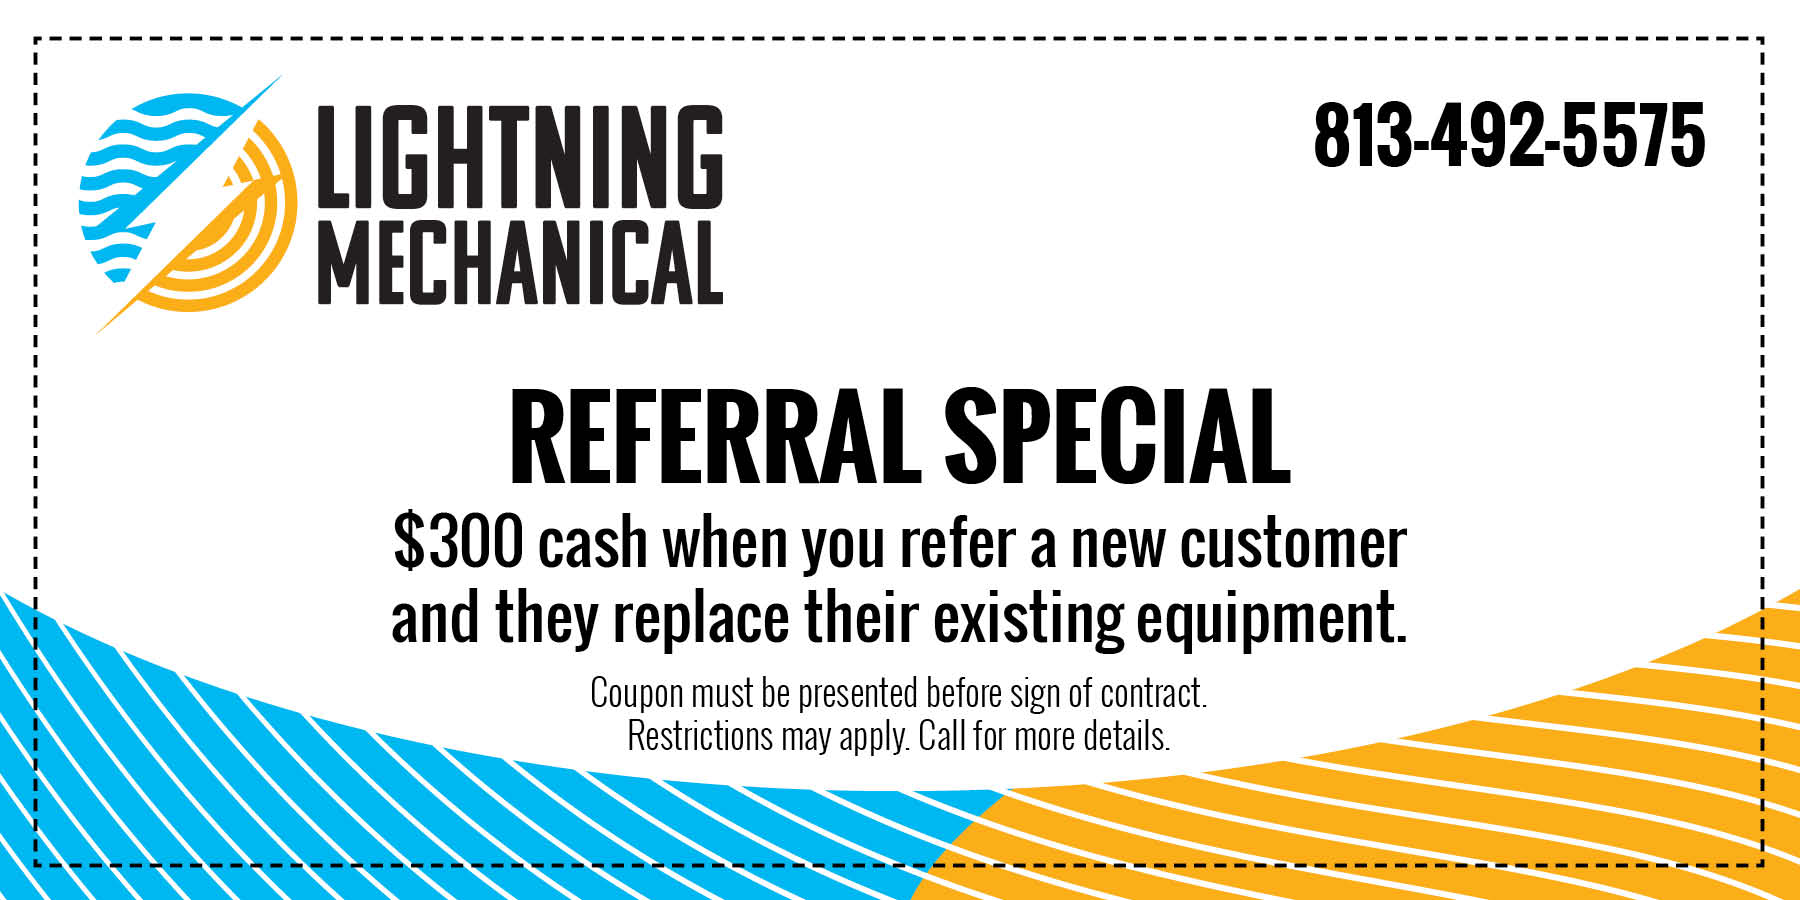 Referral special 0 cash when you refer a new customer and they replace their existing equipment.